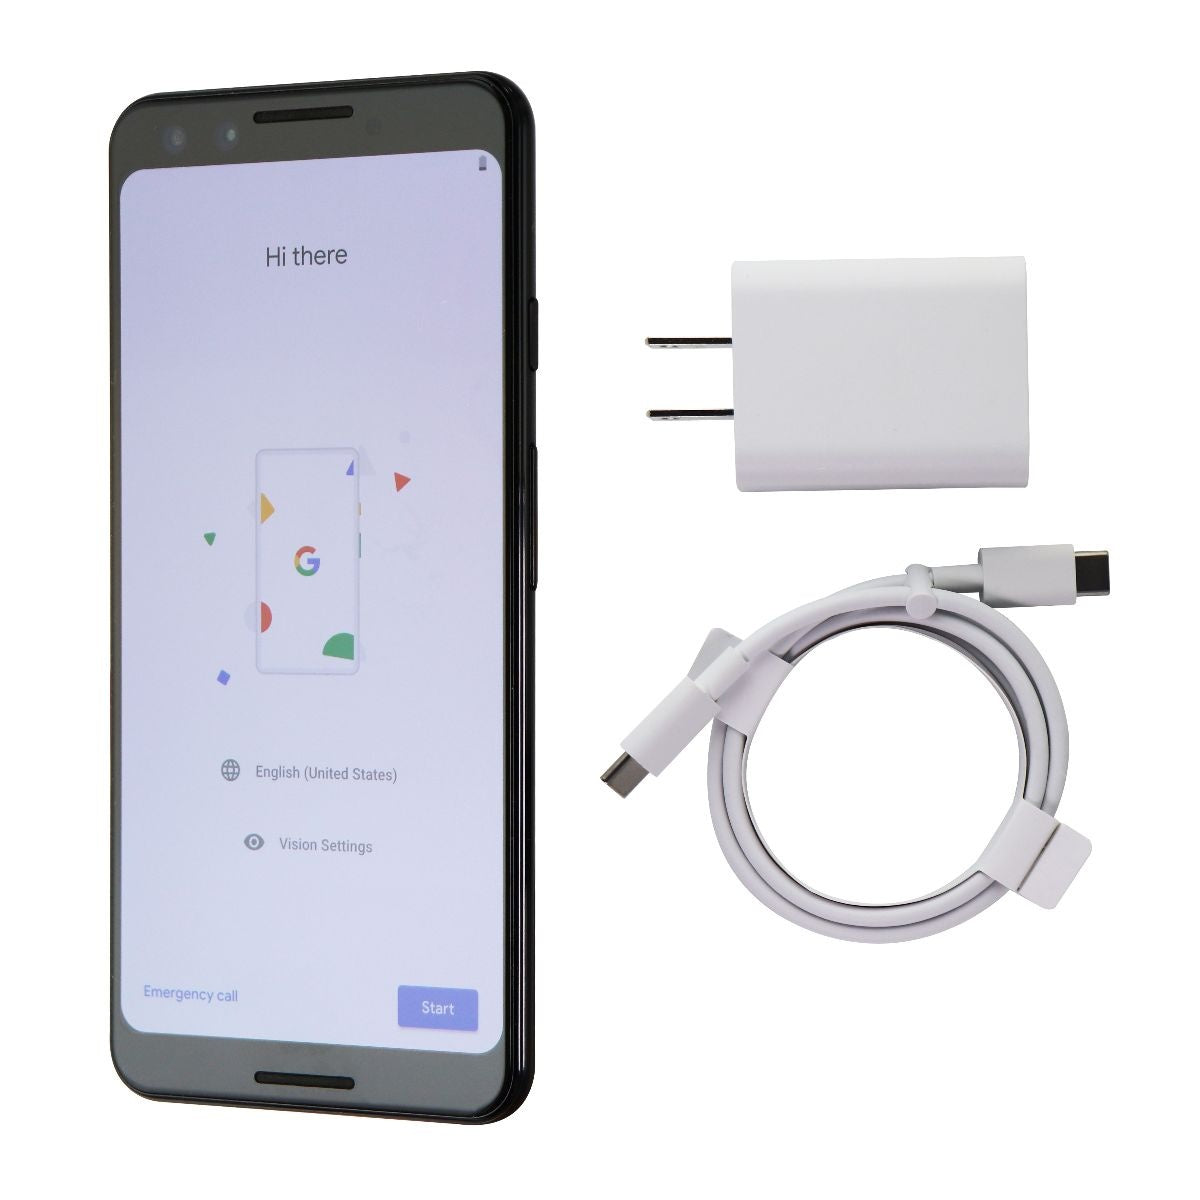 Google Pixel 3 (5.5-inch) Smartphone (G013A) Unlocked - 64GB / Just Black Cell Phones & Smartphones Google    - Simple Cell Bulk Wholesale Pricing - USA Seller